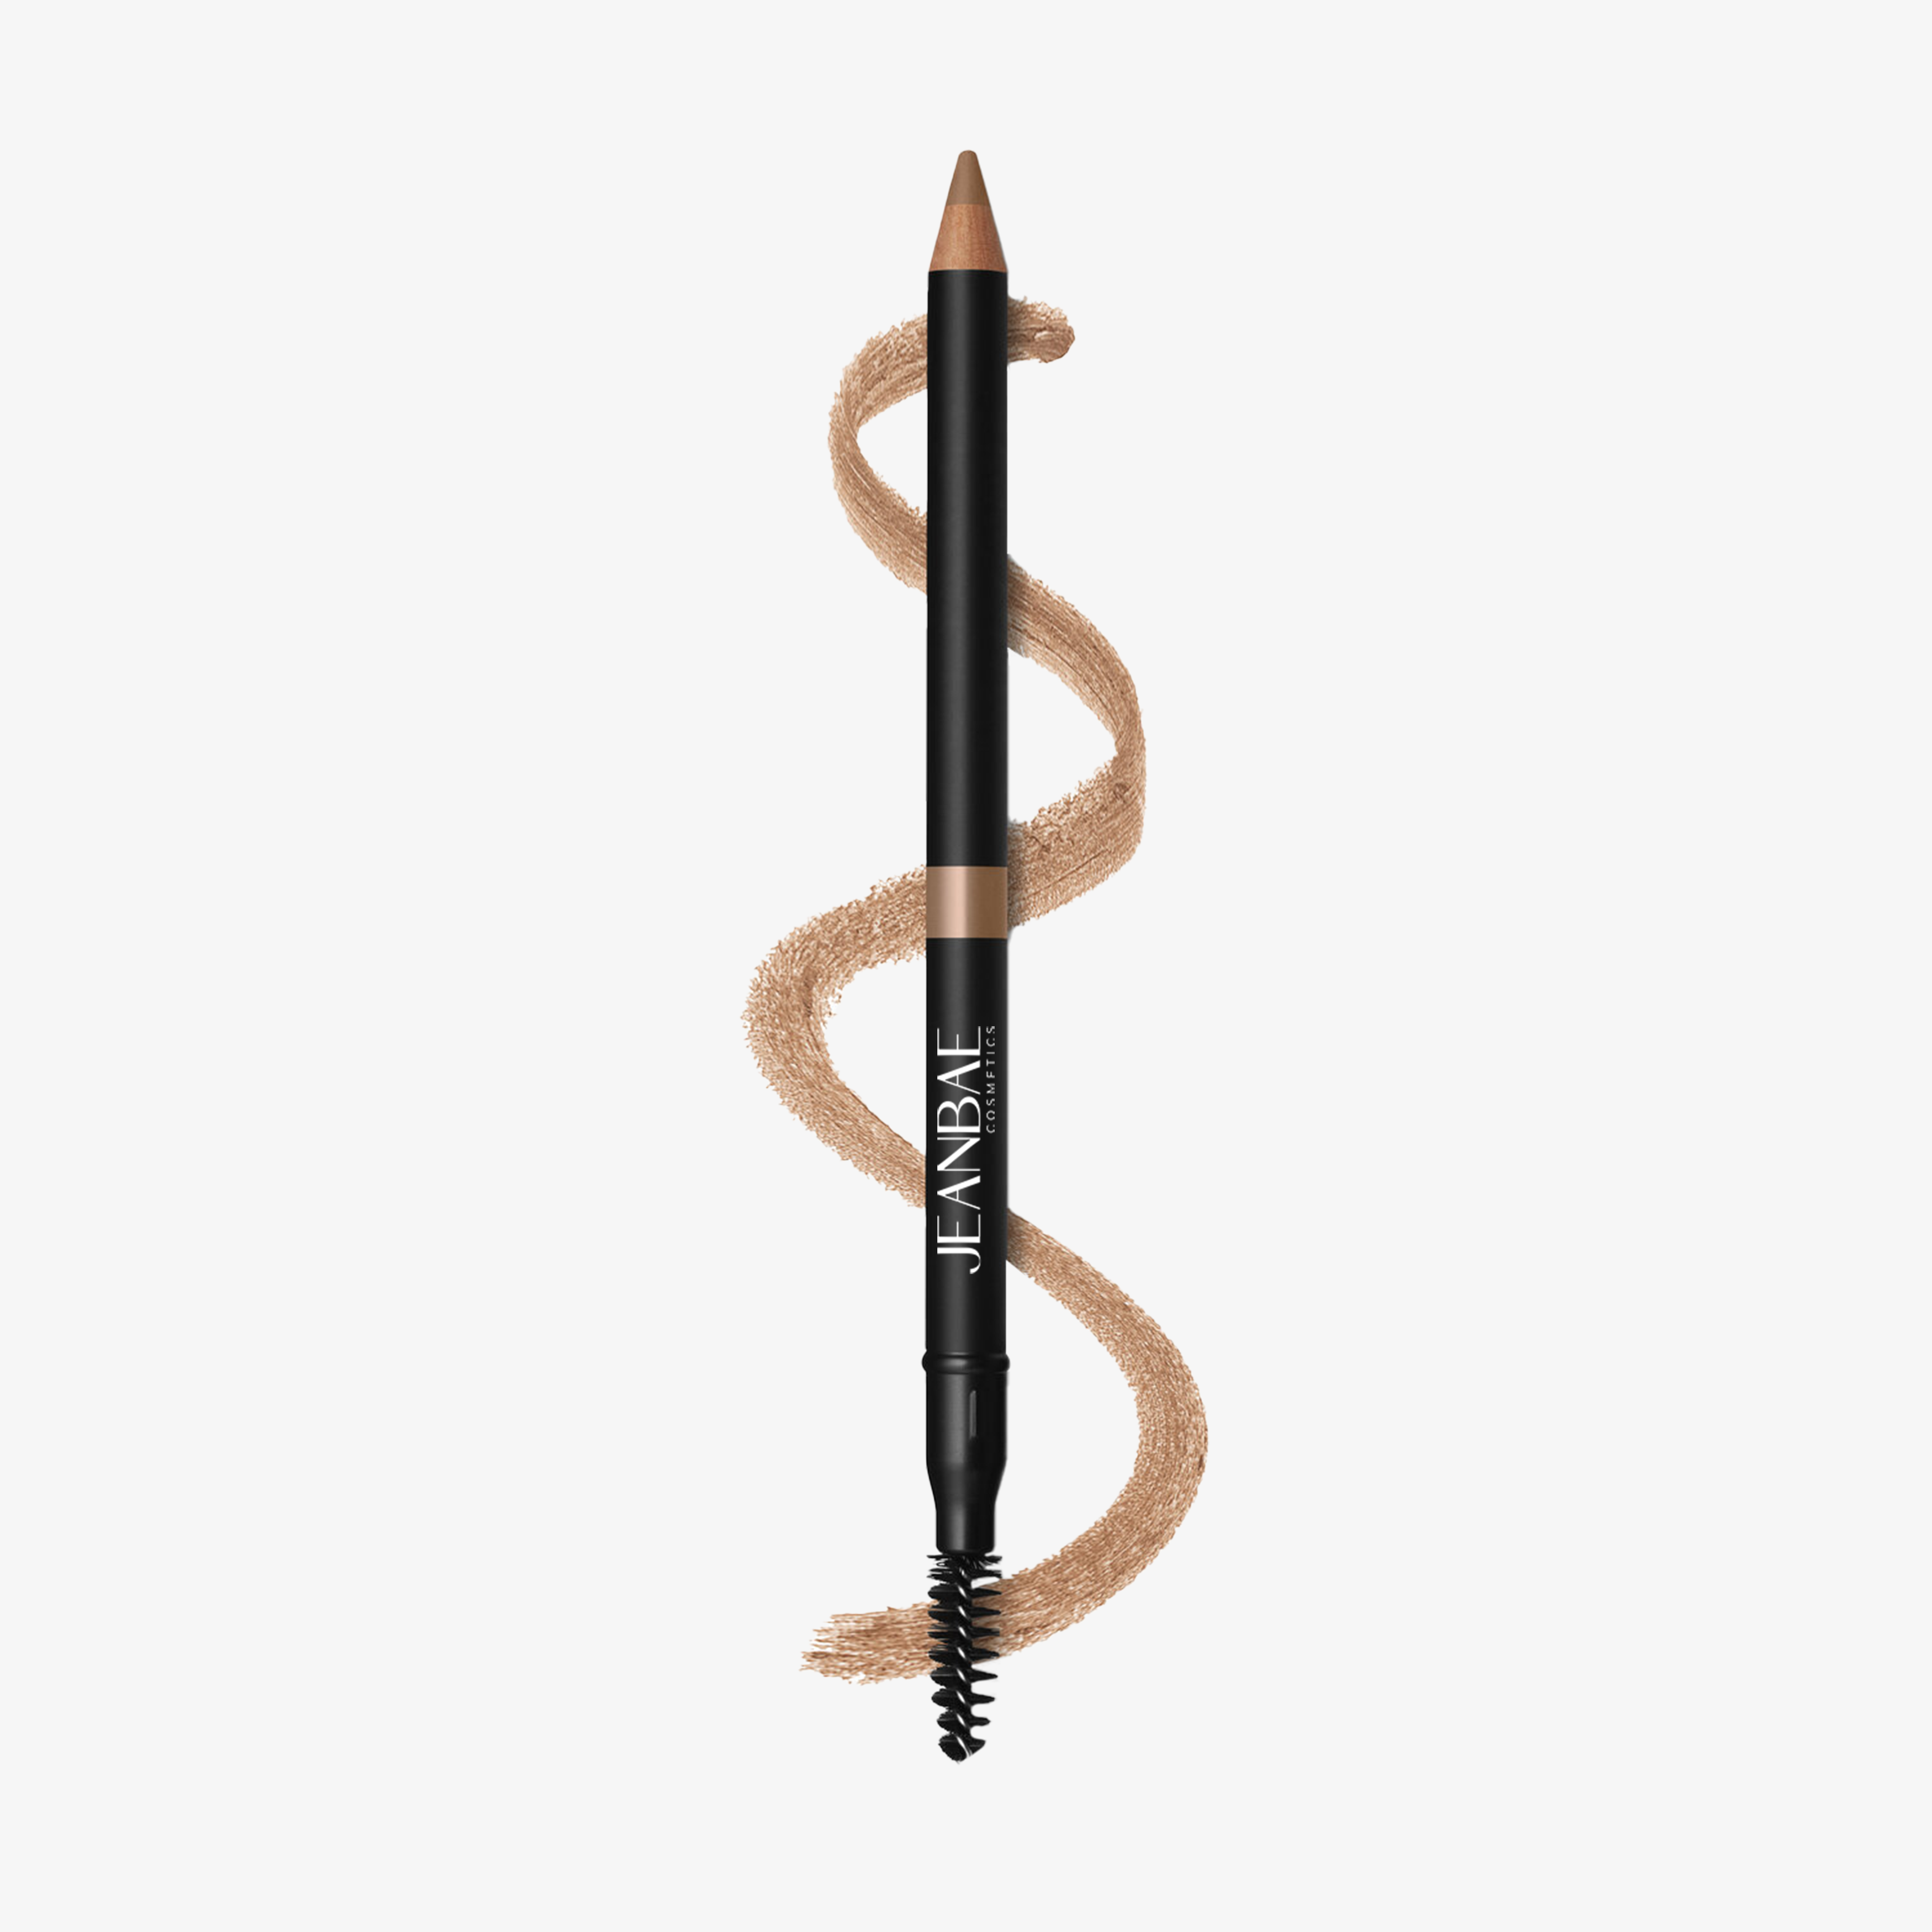 This creamy pencil formula fills and defines brows with medium to full coverage, resulting in a velvety powder, demi-matte finish. THIS PRODUCT IS Cruelty-Free, Vegan Friendly, and Prop 65 Compliant. Formulated without Alcohol or Talc. Free Of Parabens, Gluten, Phthalates, Oil, Sulfates, and GMOs.